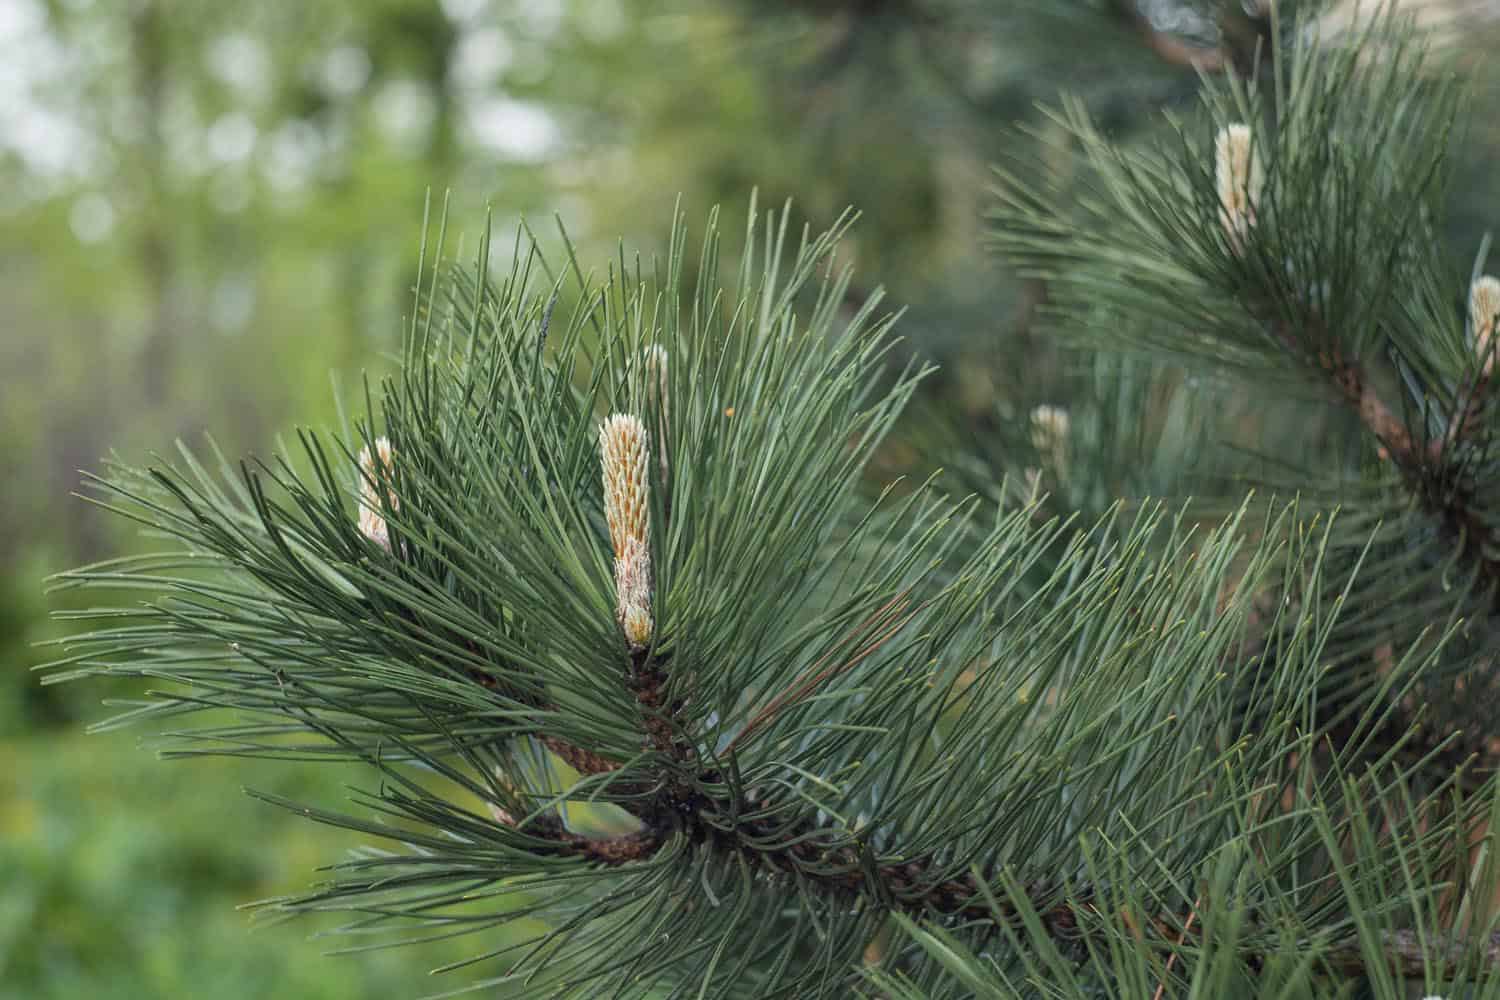 Growing Conifers From Cuttings: How To Root Pine Cuttings To Grow New Trees